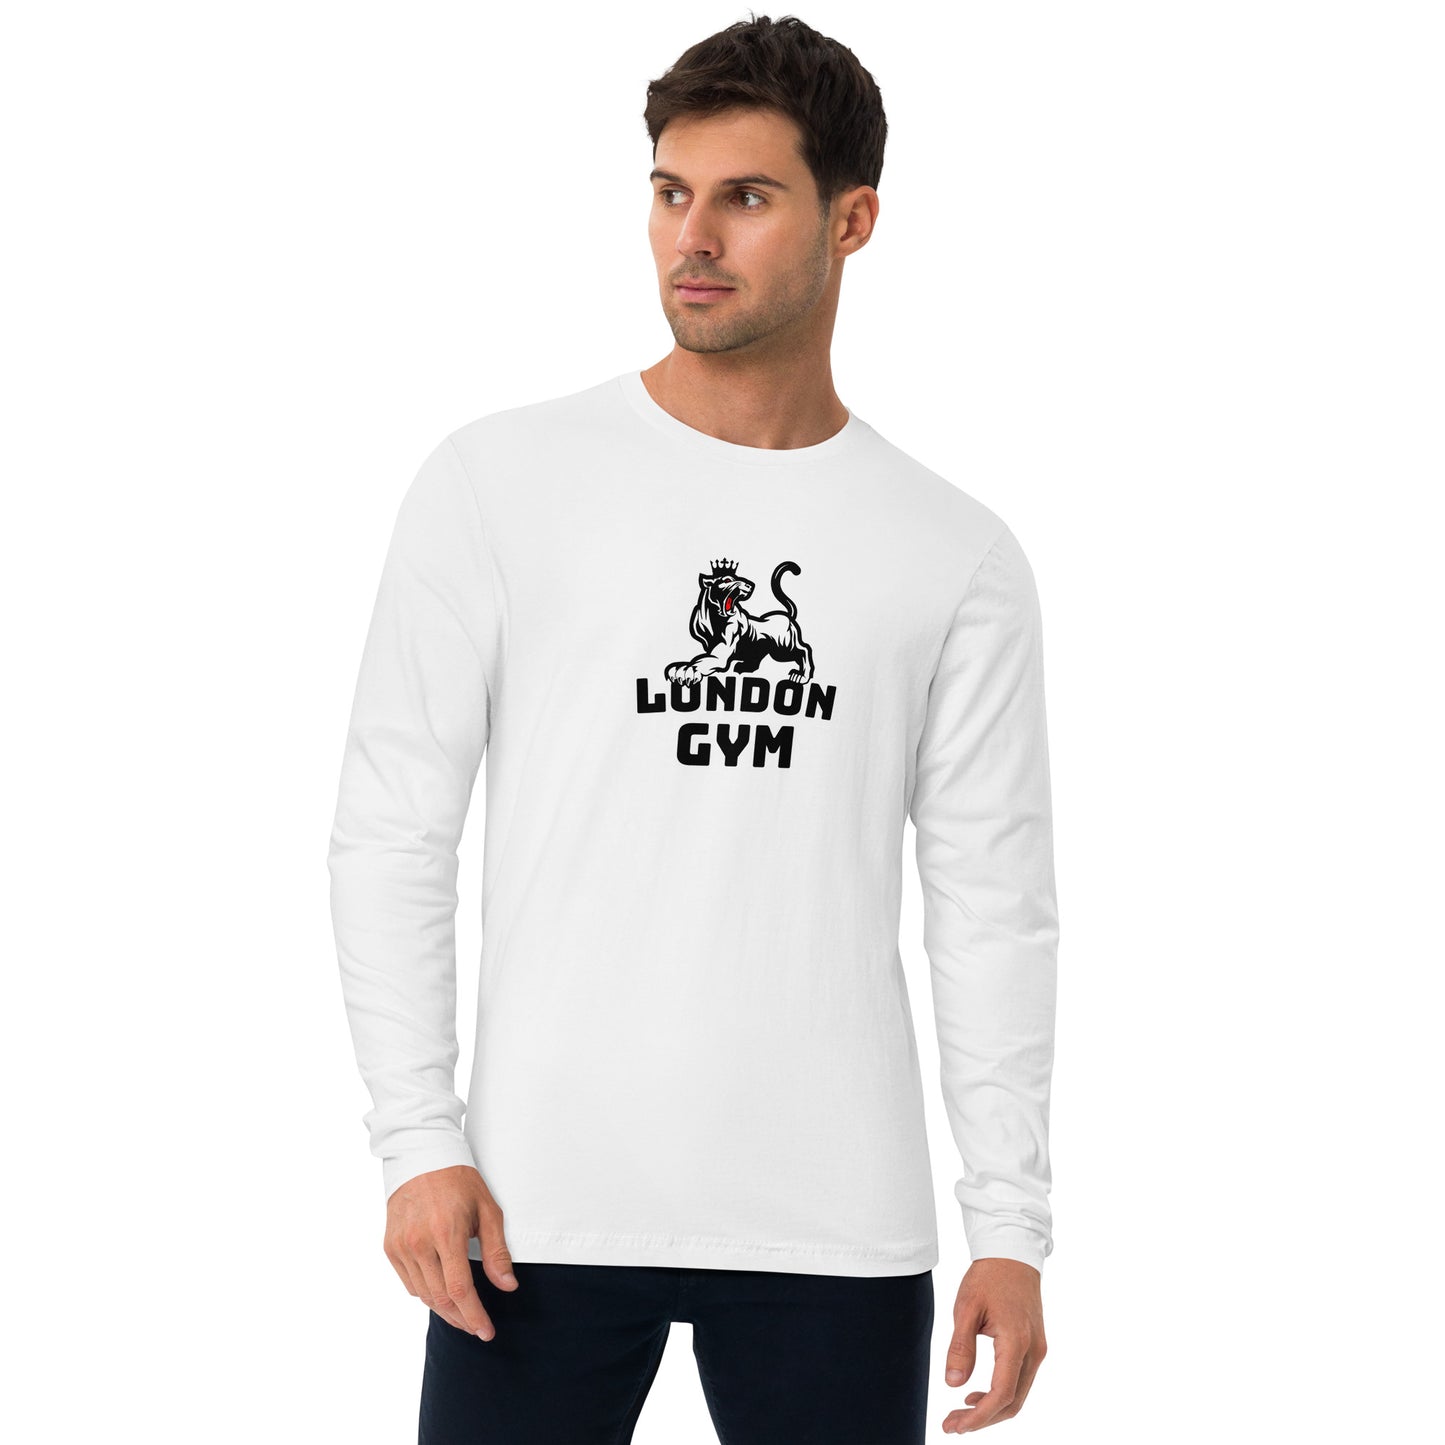 Men's Fitted Long Sleeve Shirt